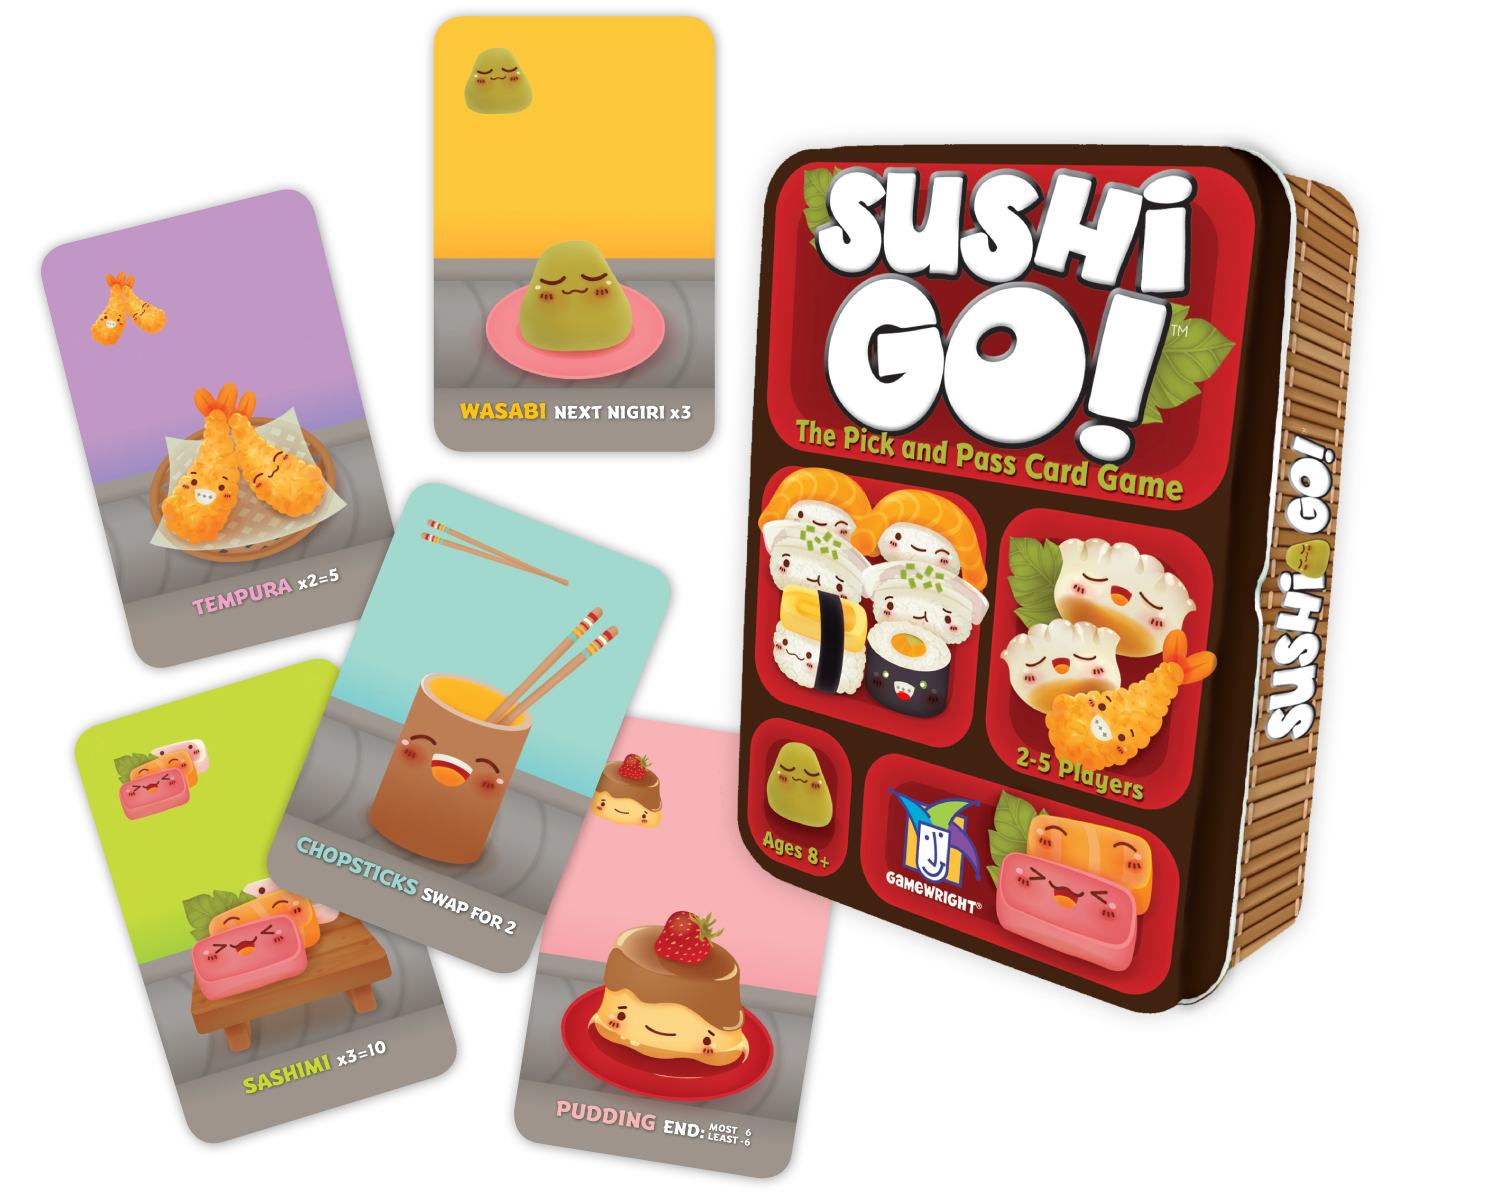 Sushi Go Party Family Card Game Deluxe Pick & Pass Gamewright Tin Box GWI 419 